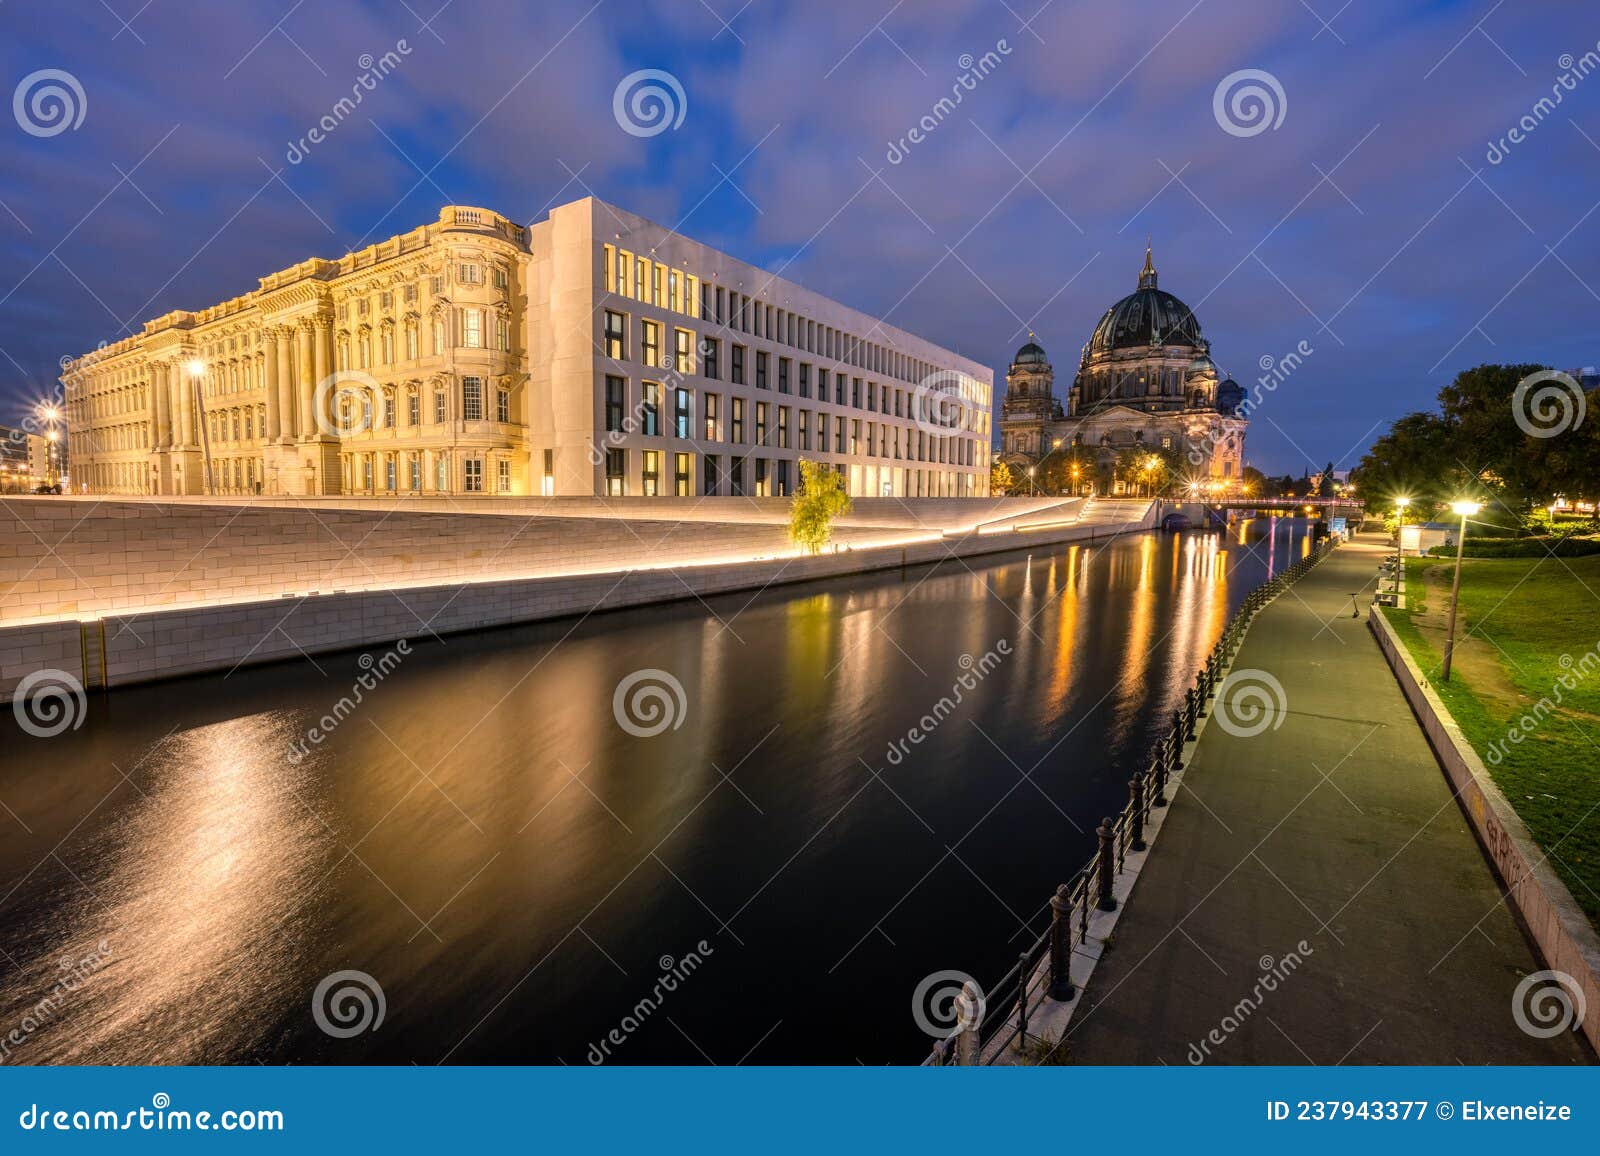 the berlin cathedral and the rebuilt city palace at dawn